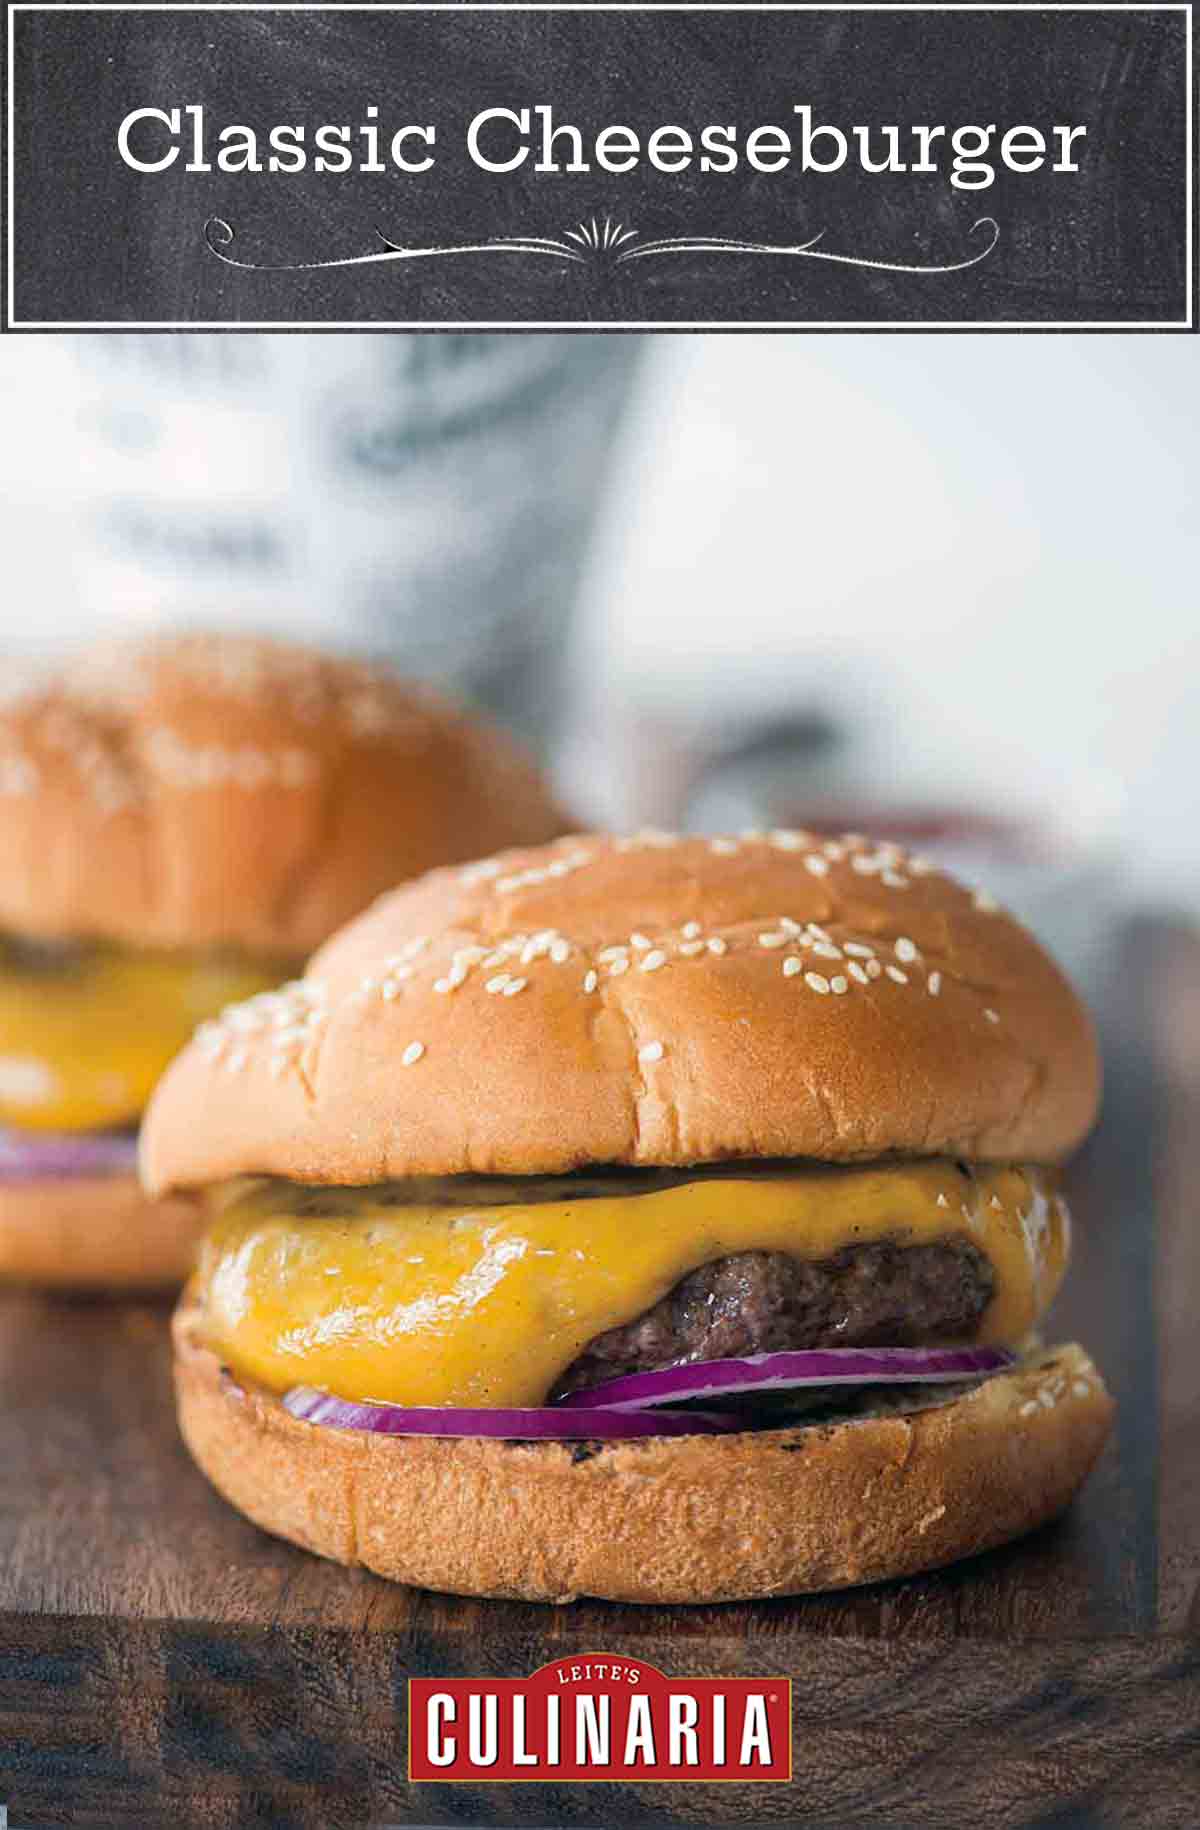 Two classic cheeseburgers with red onion and pickles on sesame buns on a wooden serving board.